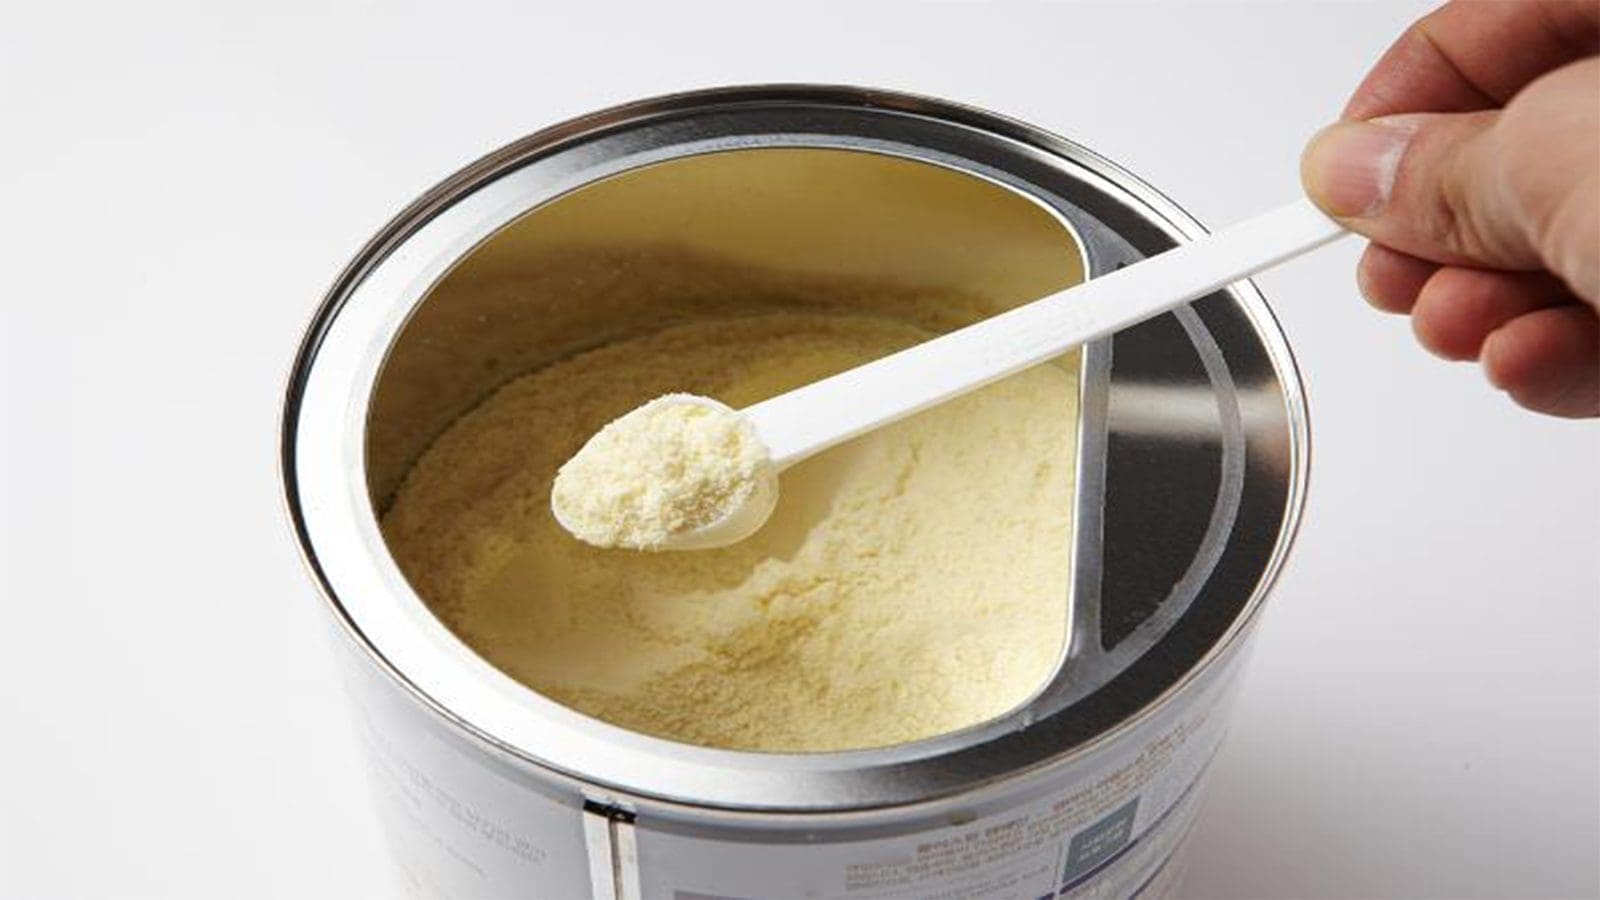 FDA works to prevent Cronobacter infections associated with consumption of powdered infant formula